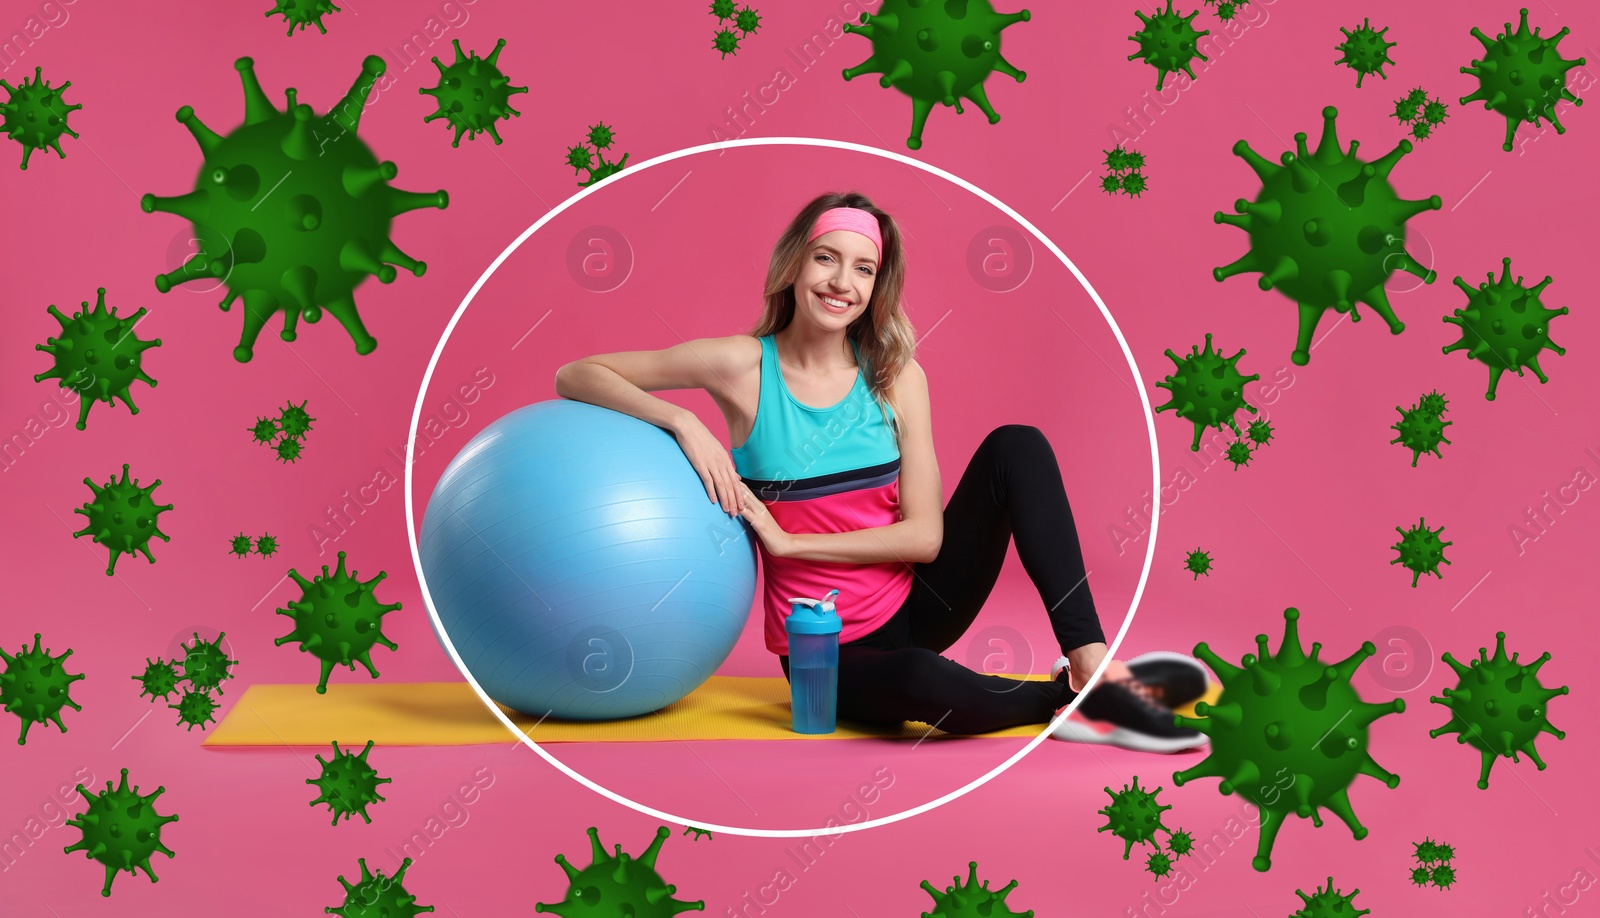 Image of Healthy woman with exercise ball surrounded by drawn viruses on pink background. Sporty lifestyle - base of strong immunity. Banner design